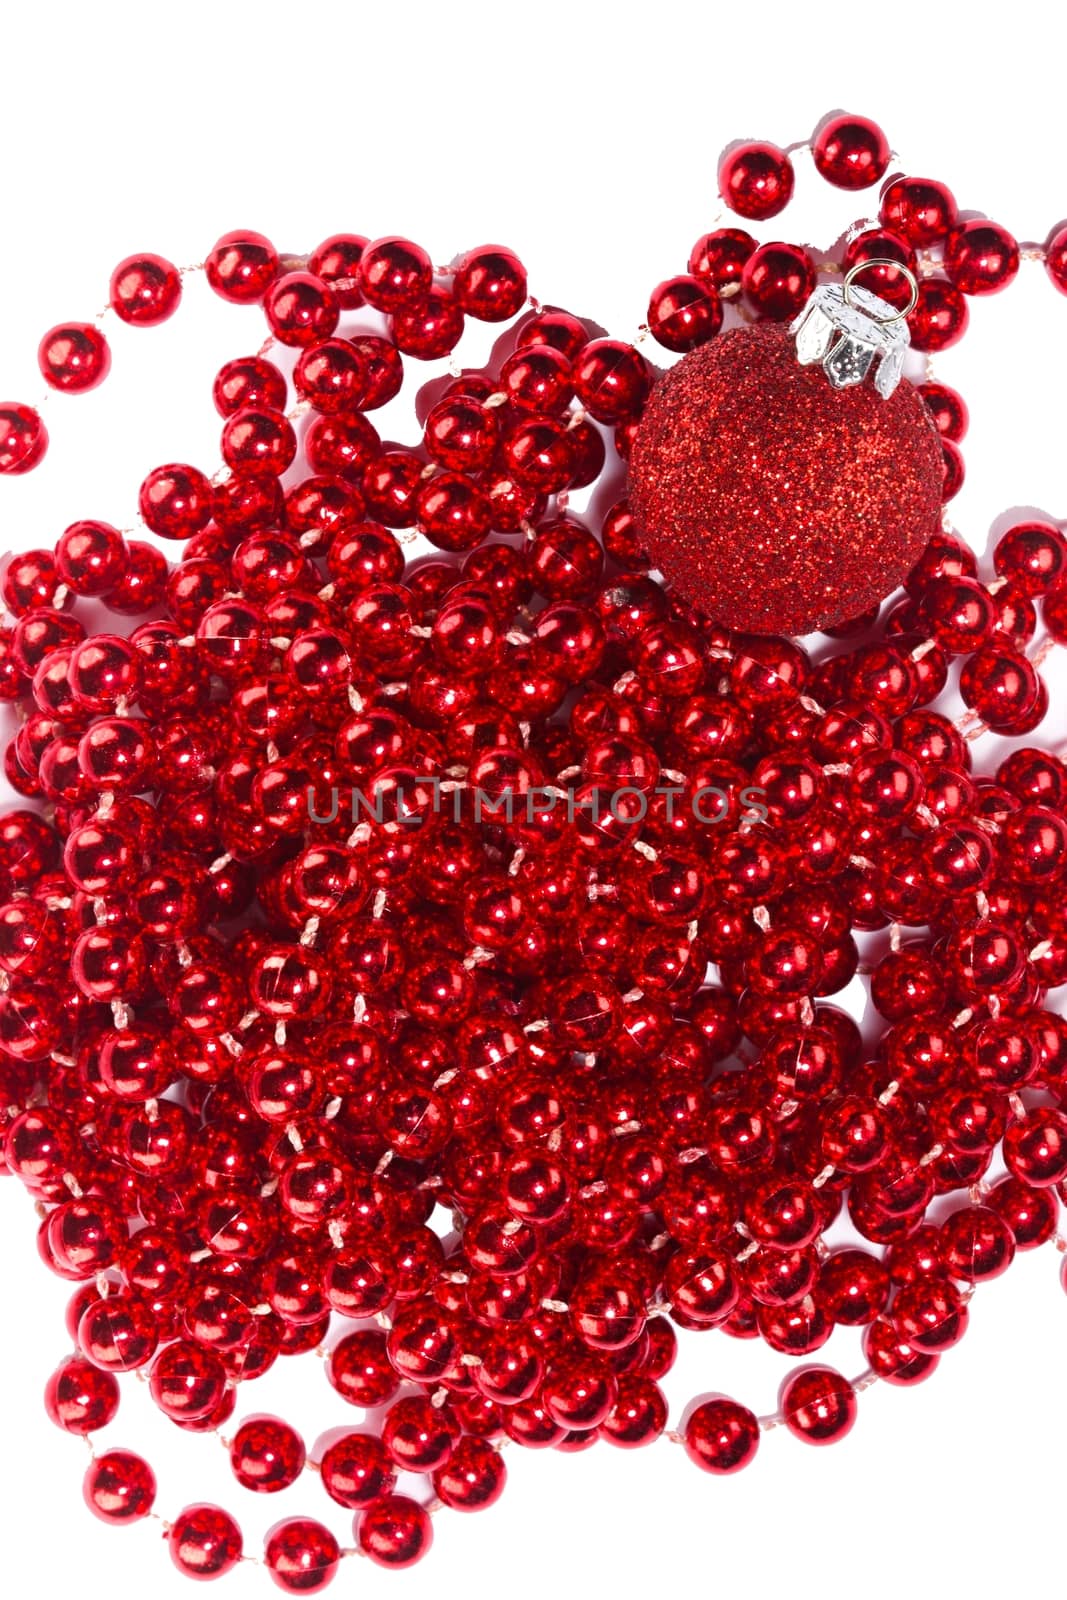 Red Christmas beads and ornament by Dermot68